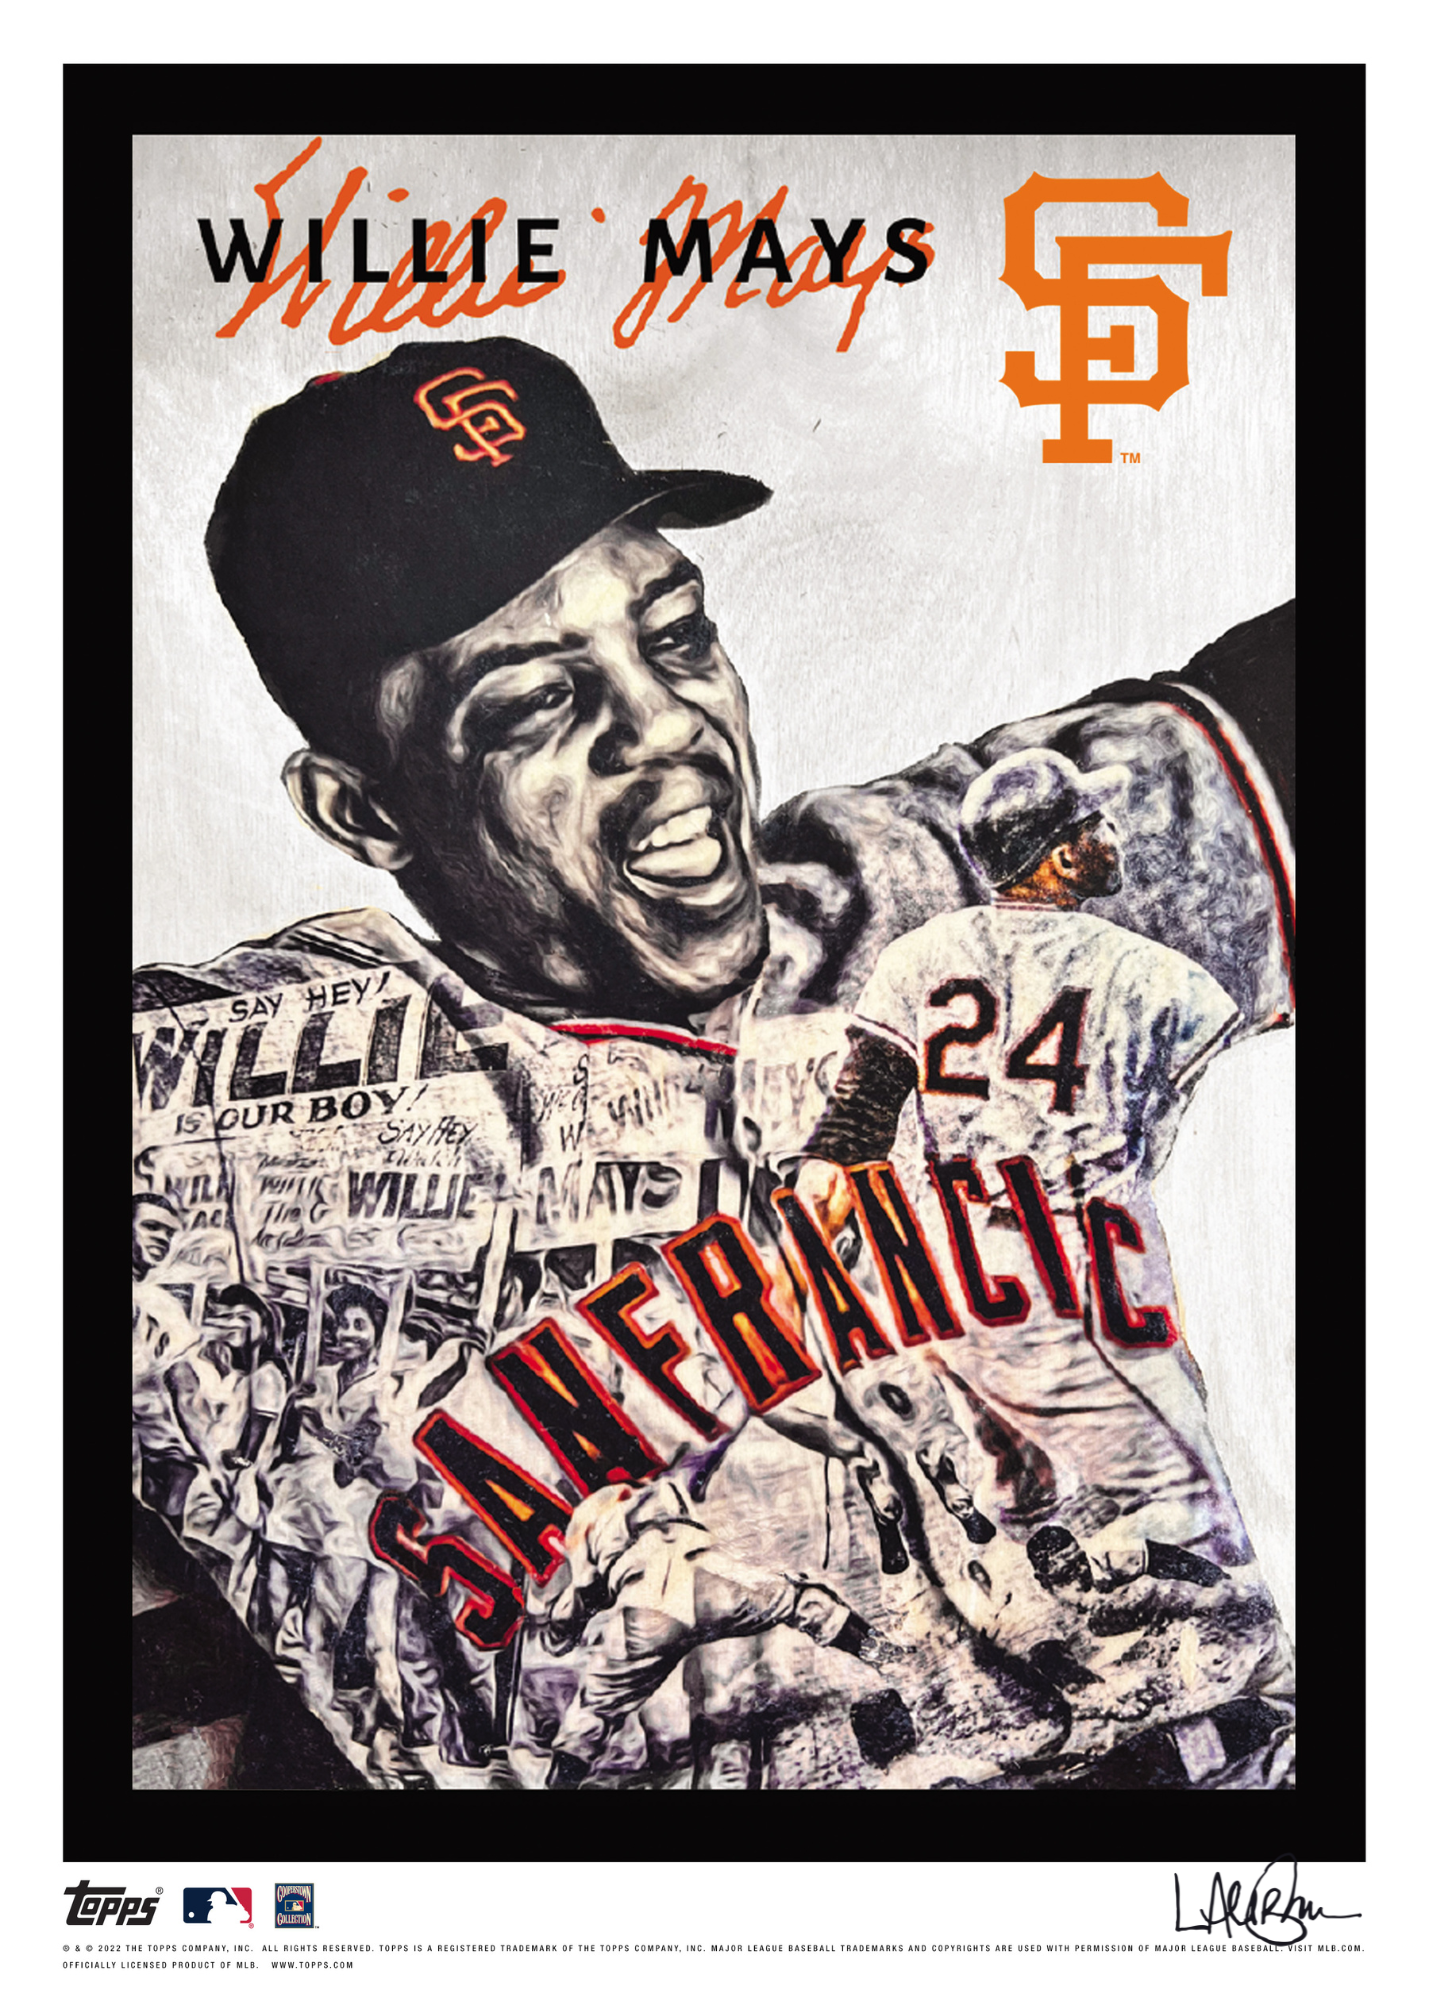 Black Artist Signature - Topps Wall Art (10x14) of card #741 by Lauren Taylor - Willie Mays